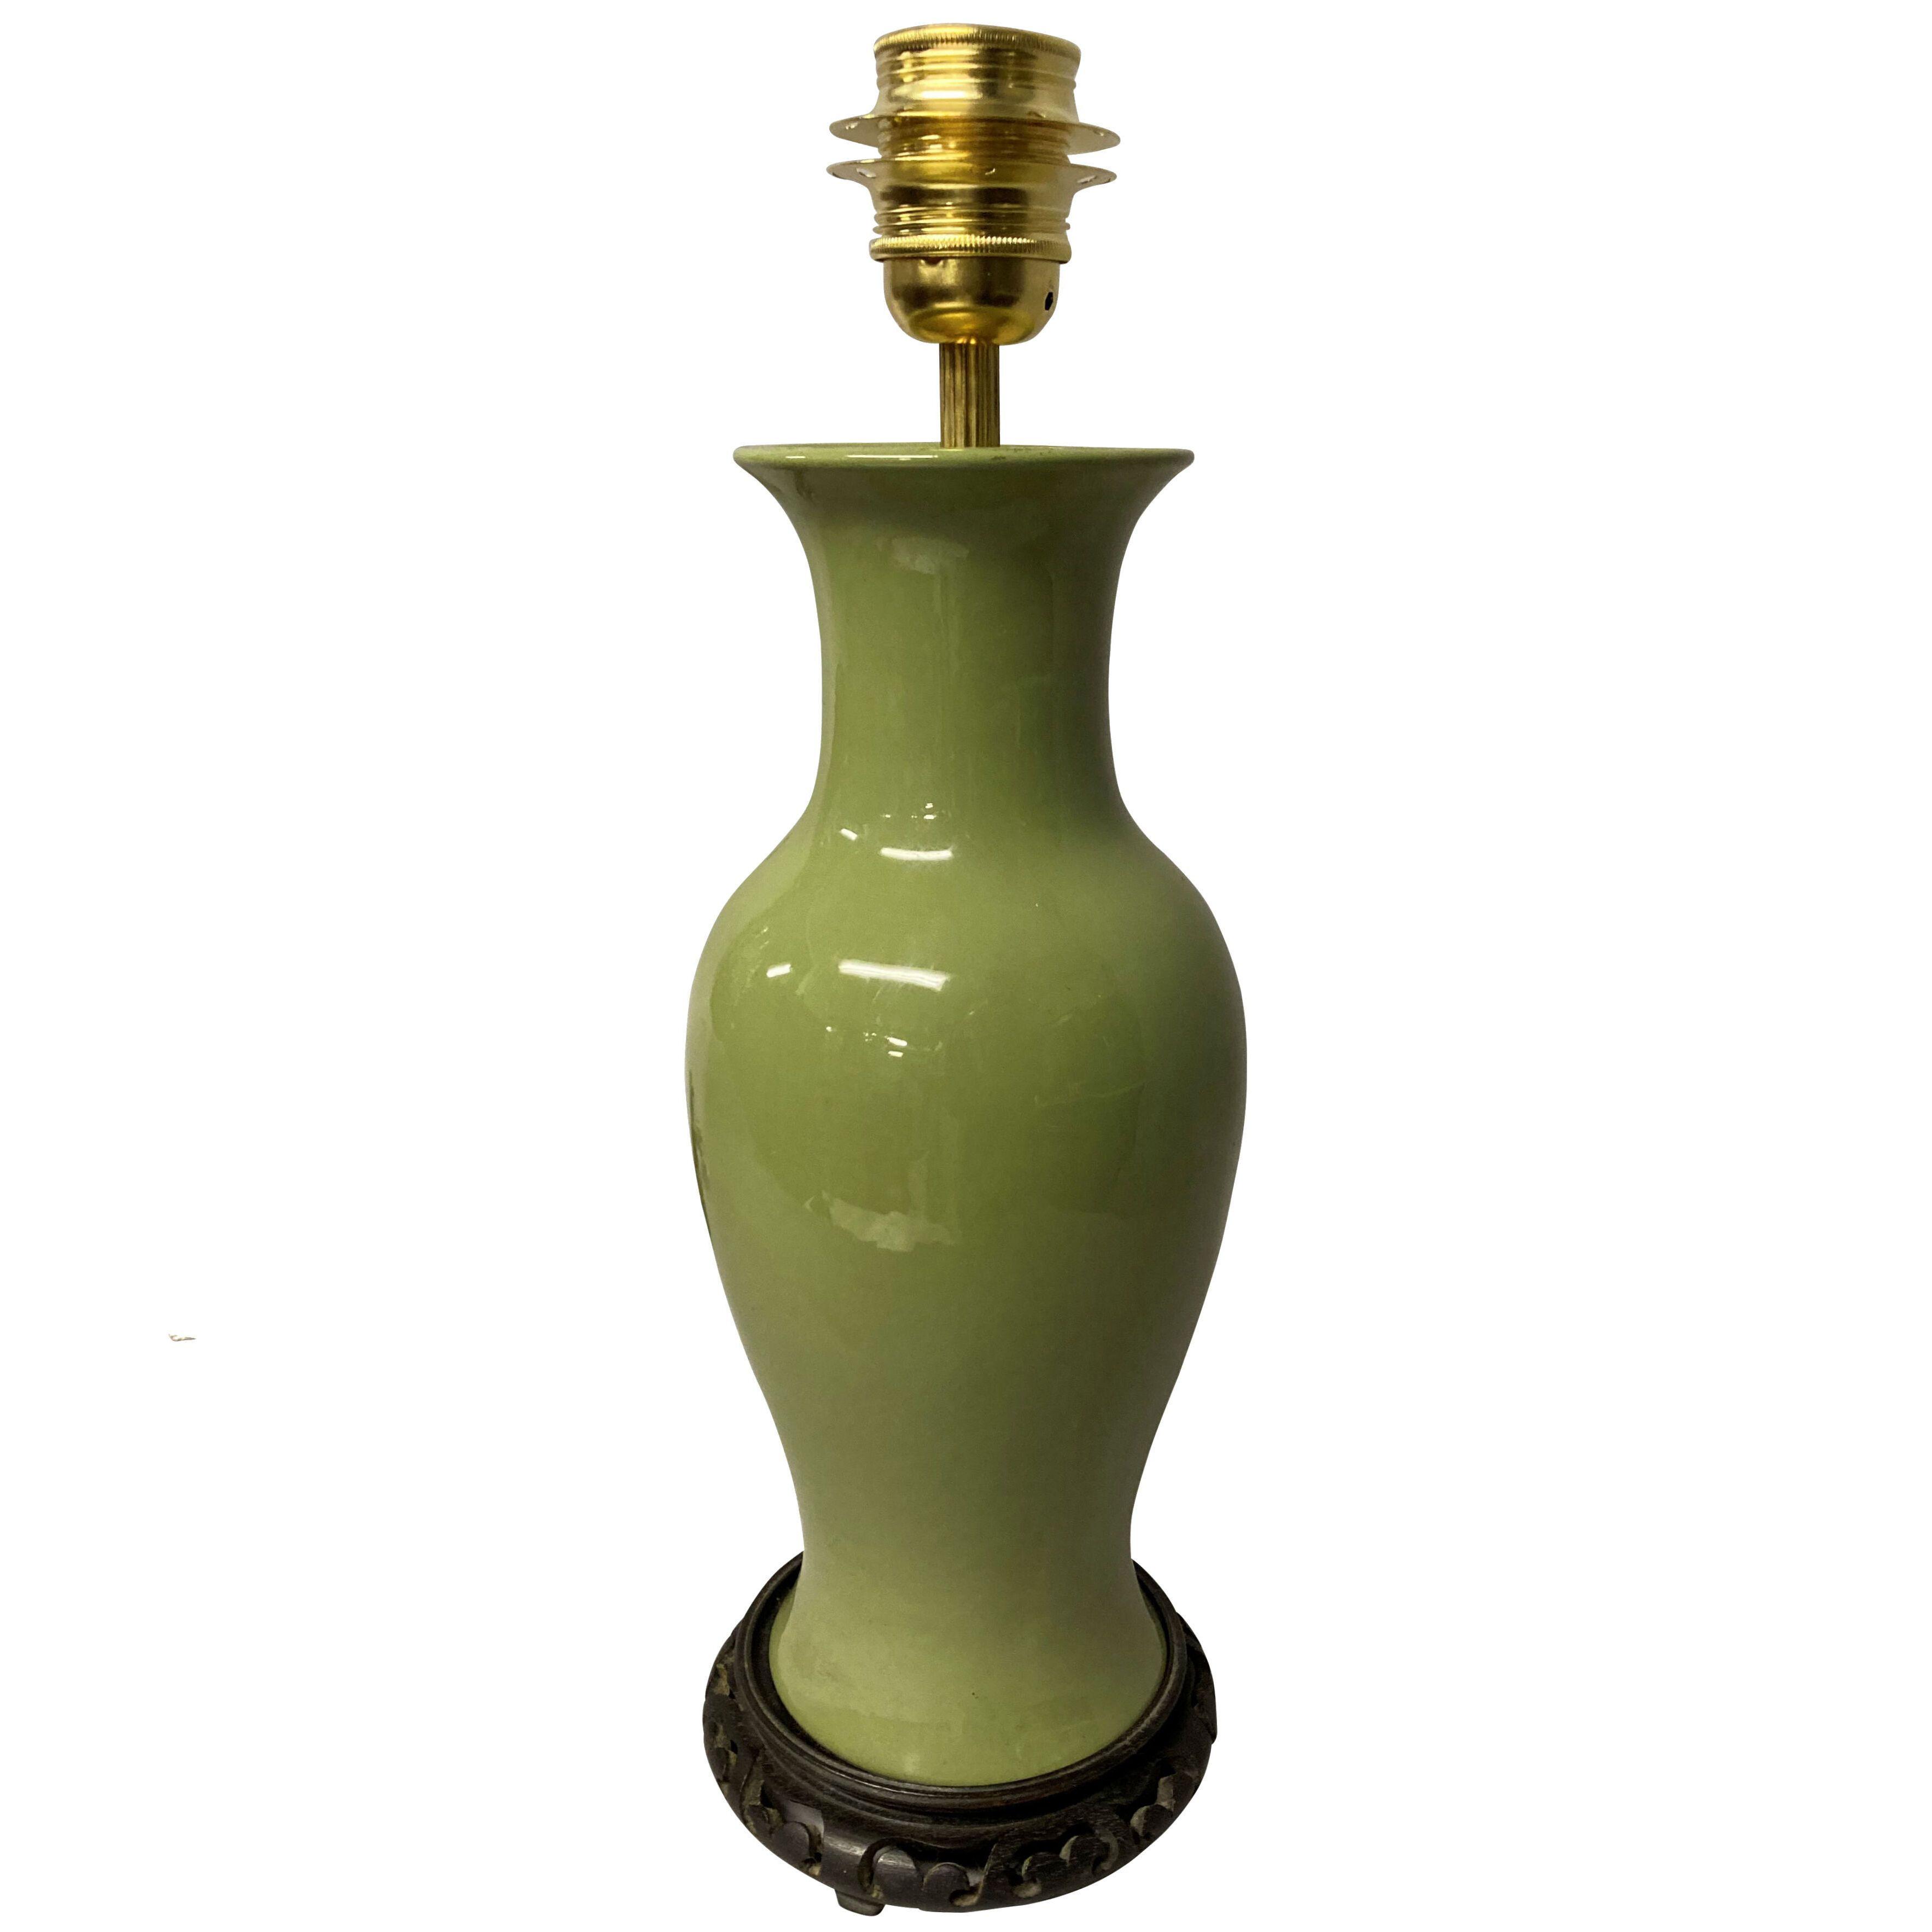 A CHINESE GREEN GLAZED PORCELAIN LAMP